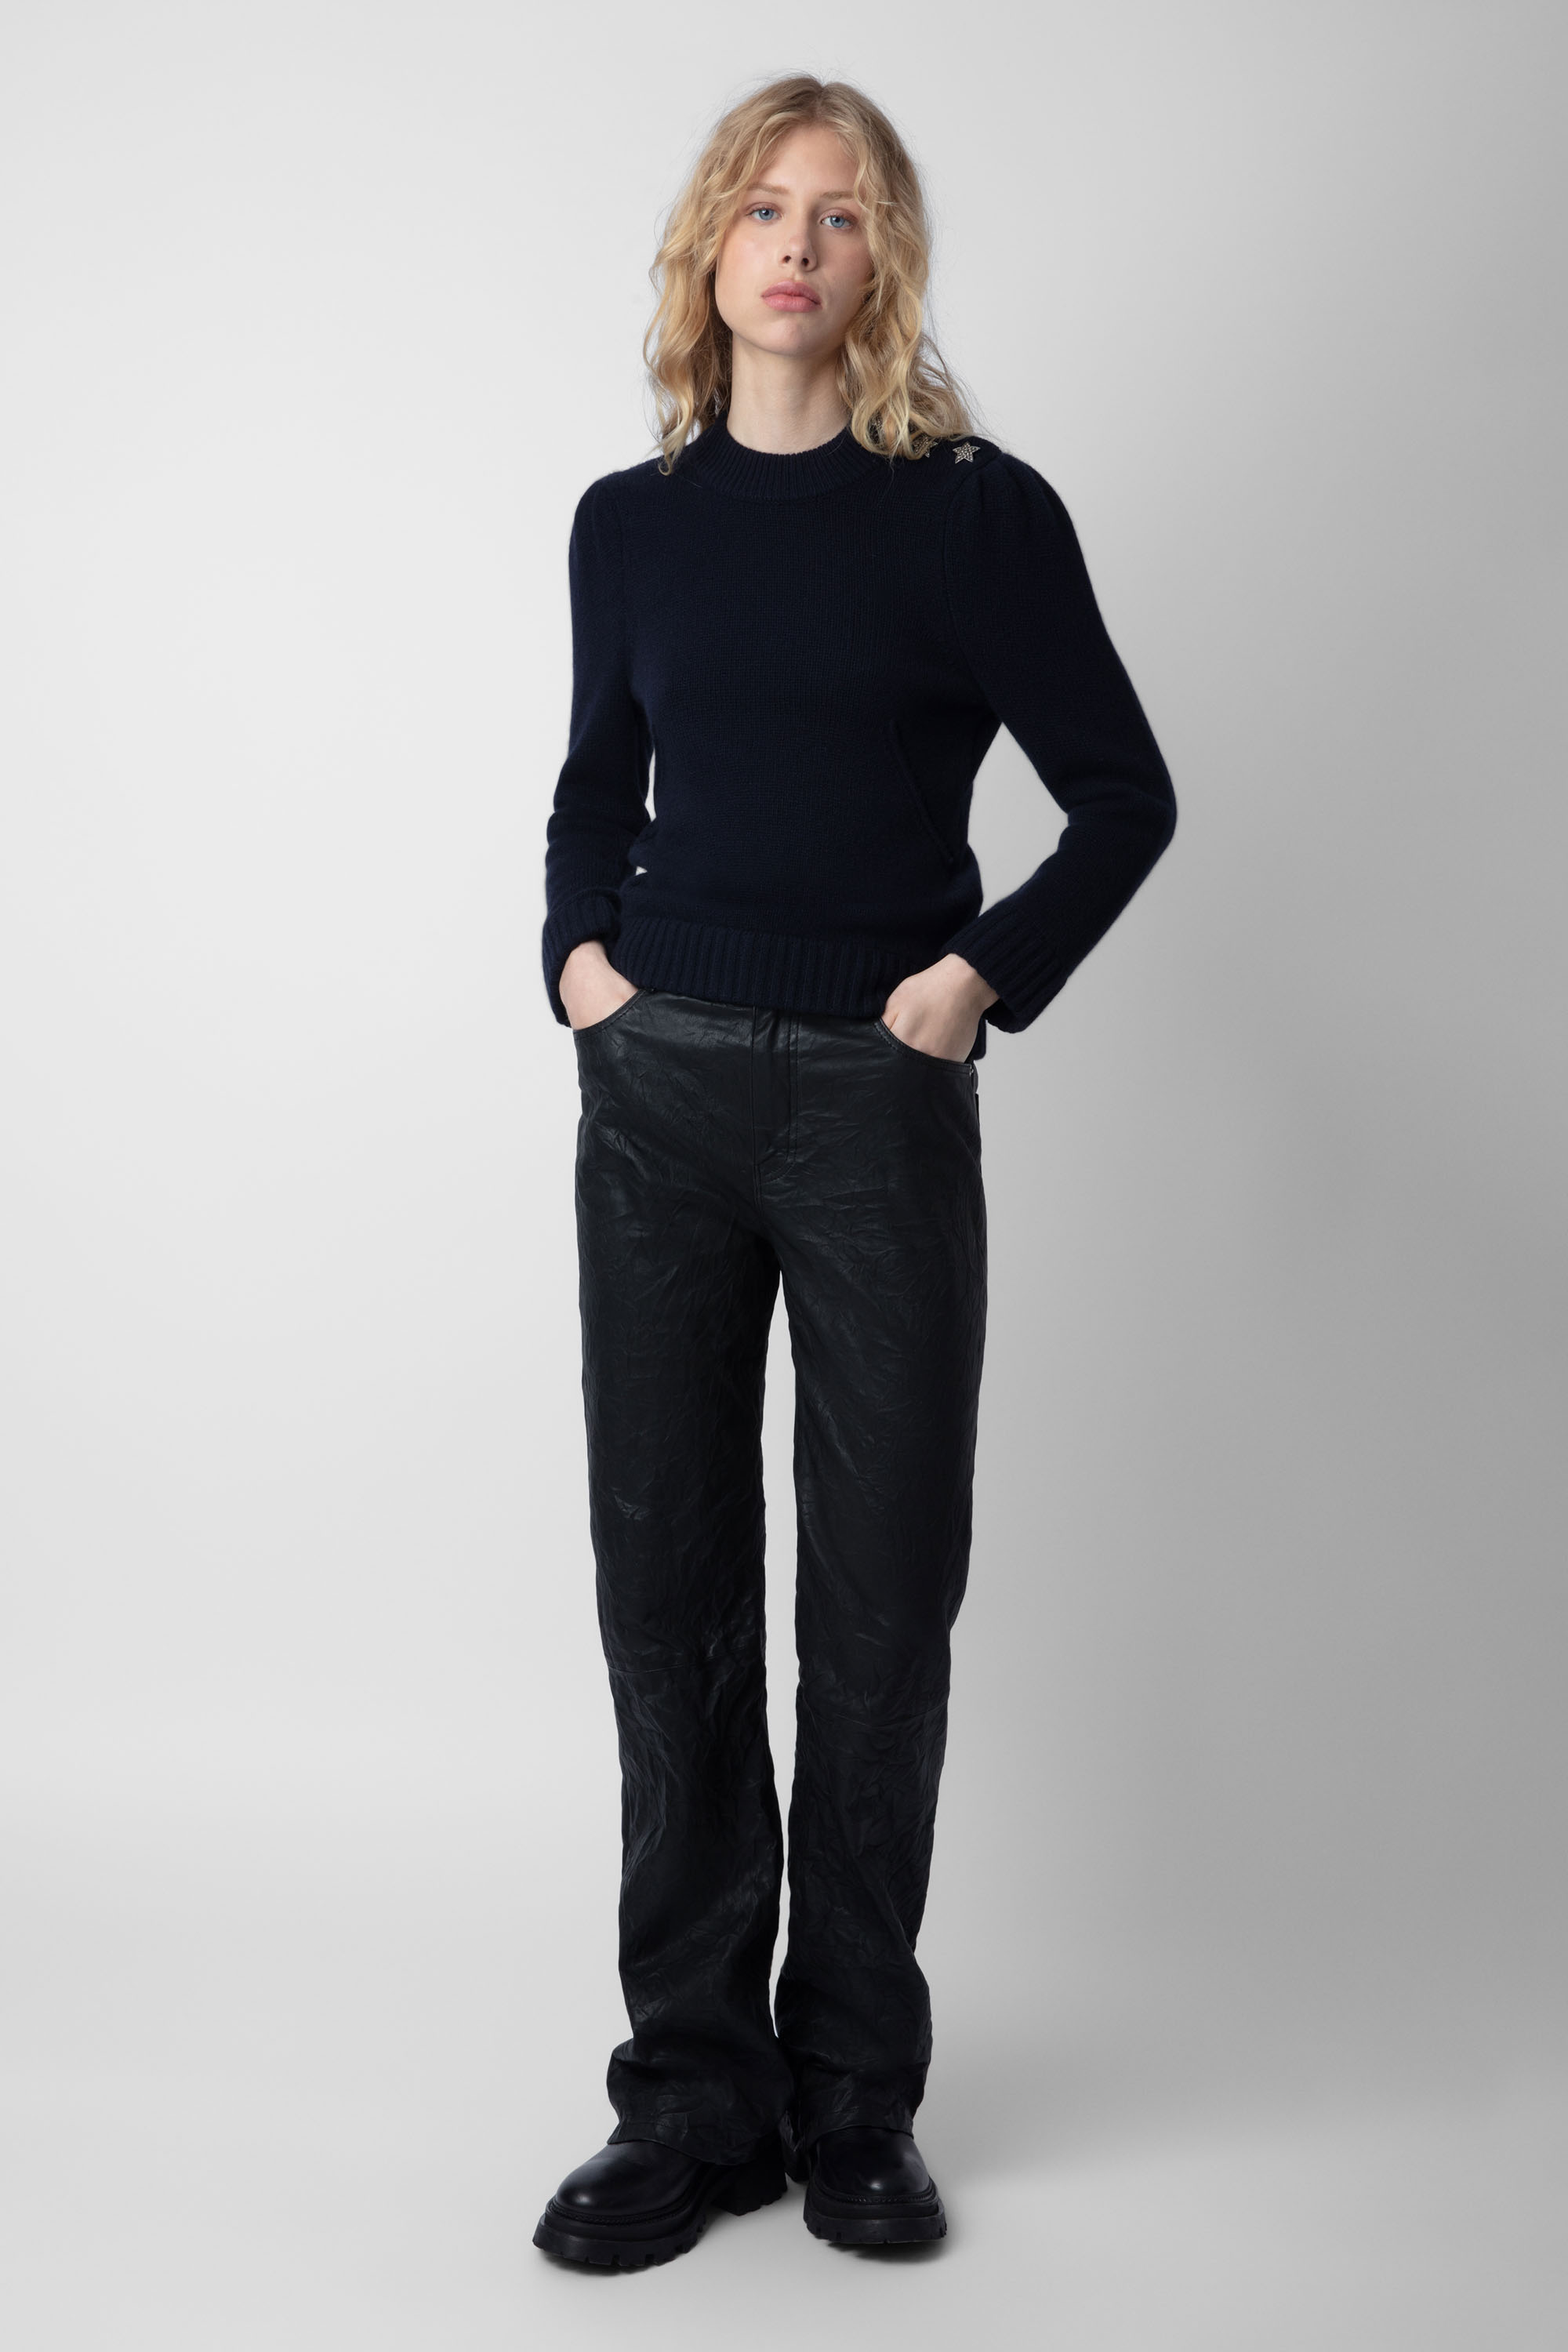 Betson Cashmere Sweater